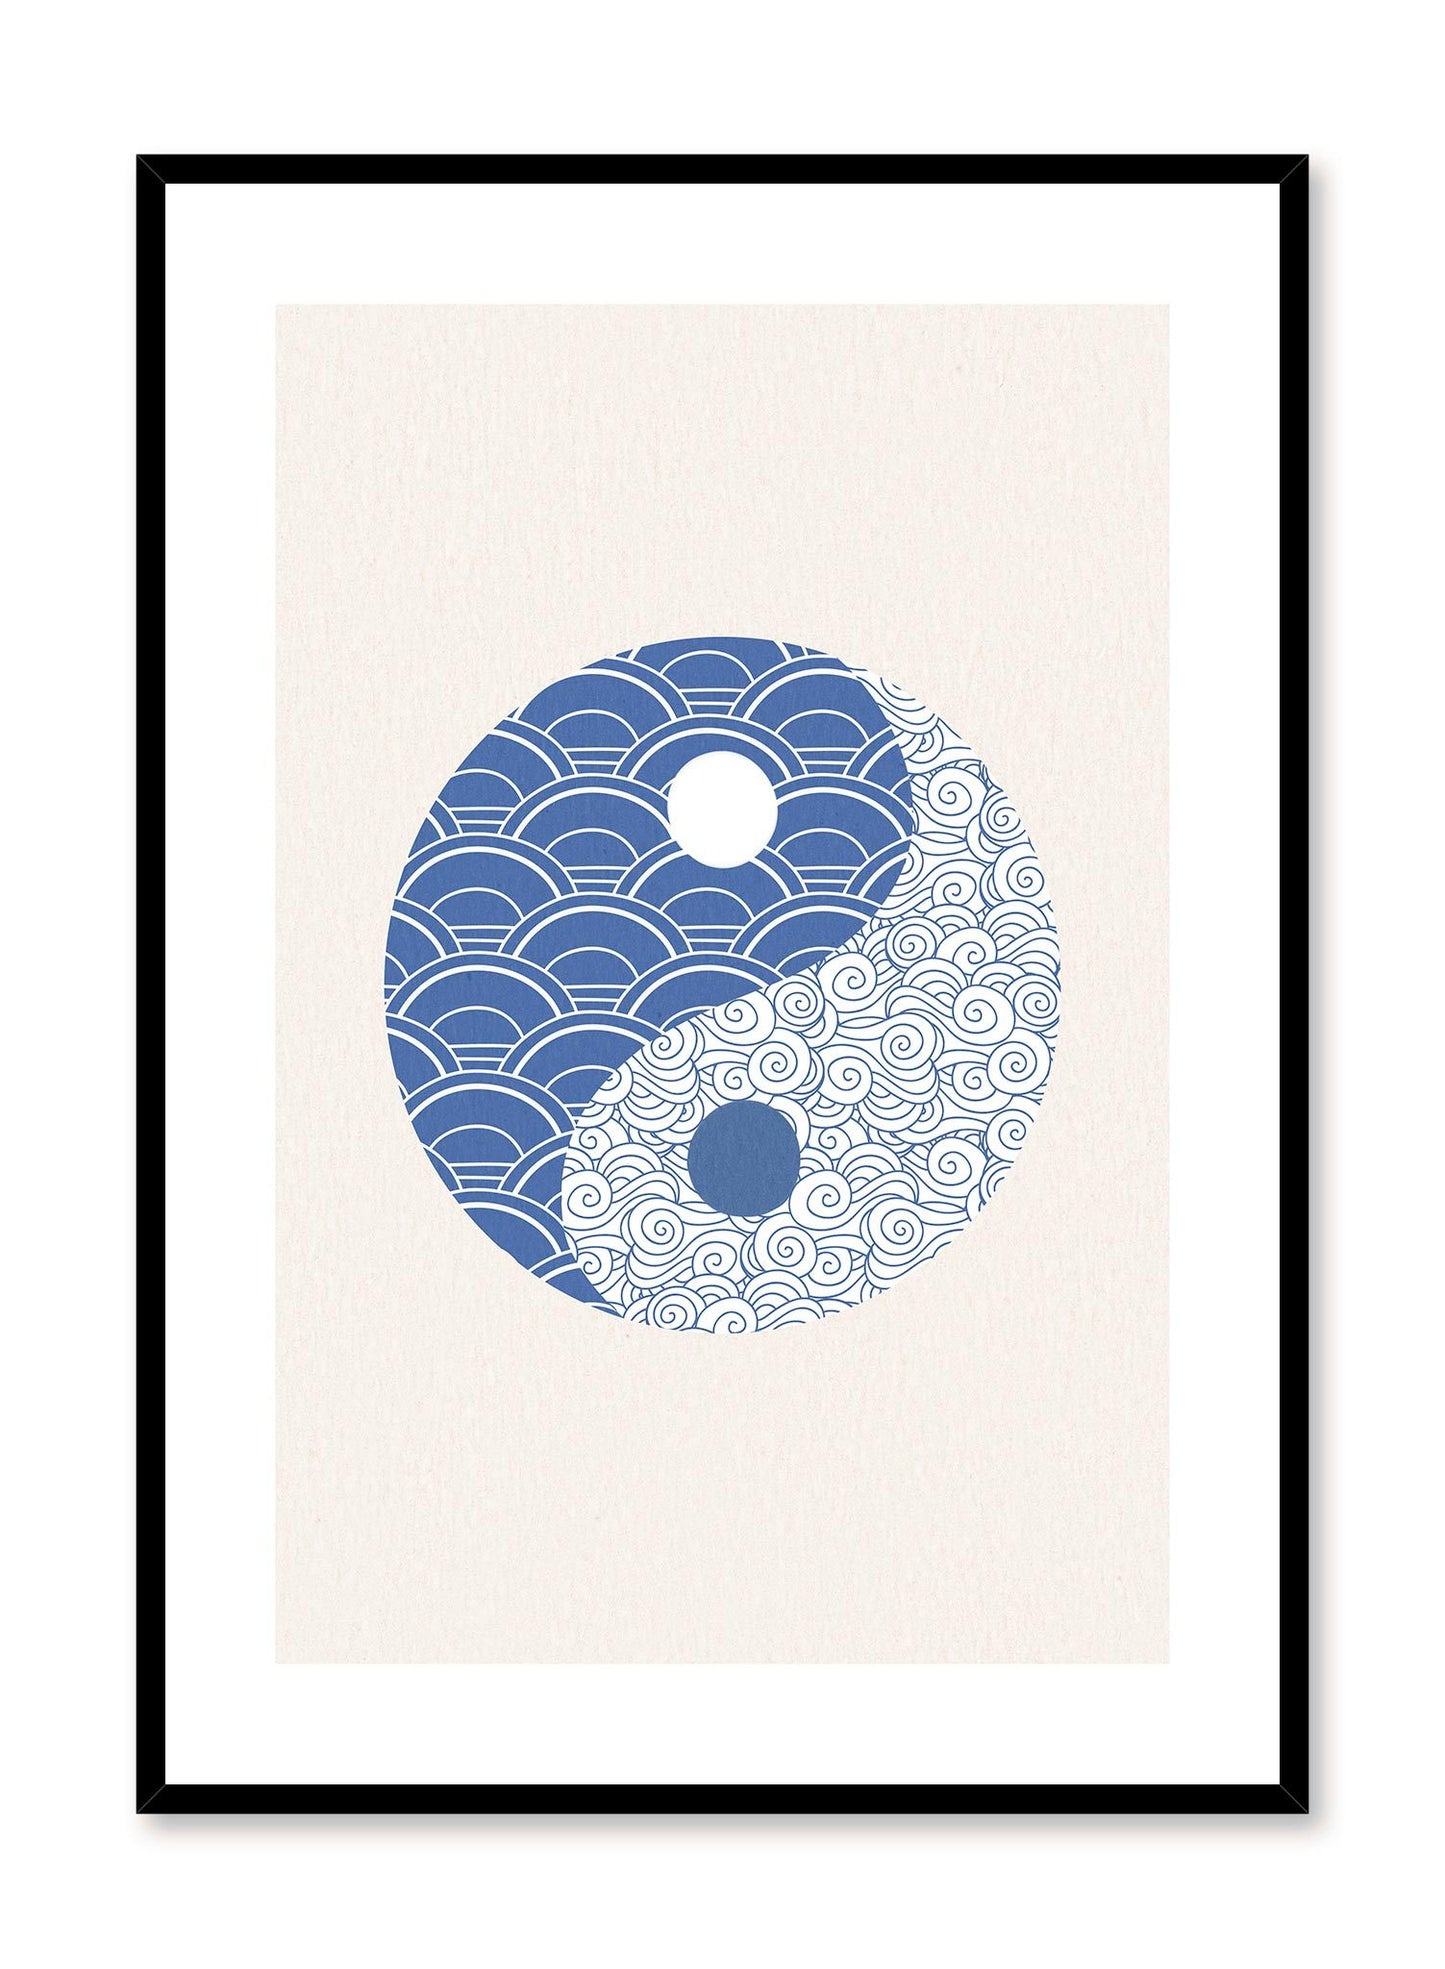 Yin-Yang is a minimalist illustration by Opposite Wall of the Yin-Yang sign filled with oriental patterns instead.